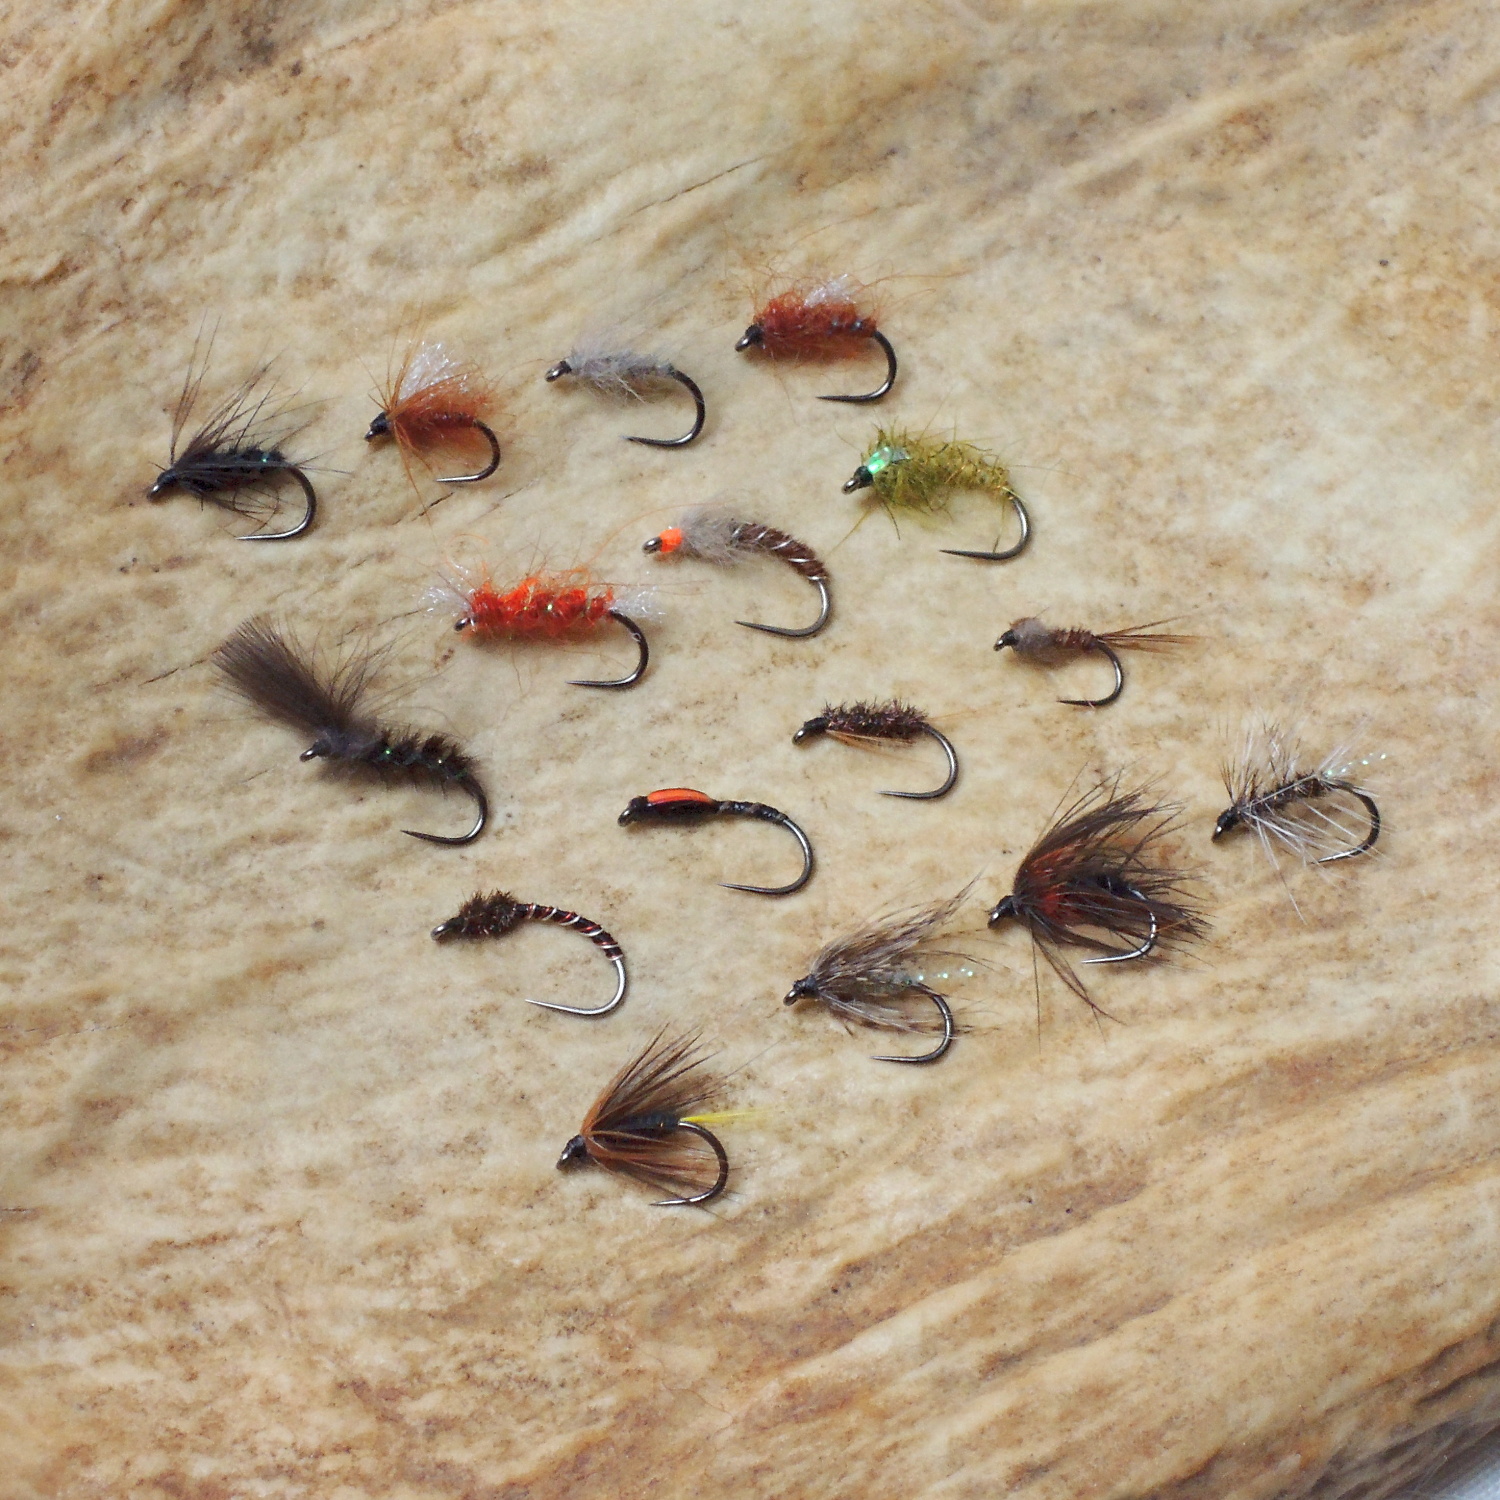 TOP AR Trout Flies For Clear Stillwaters - Fly Selection